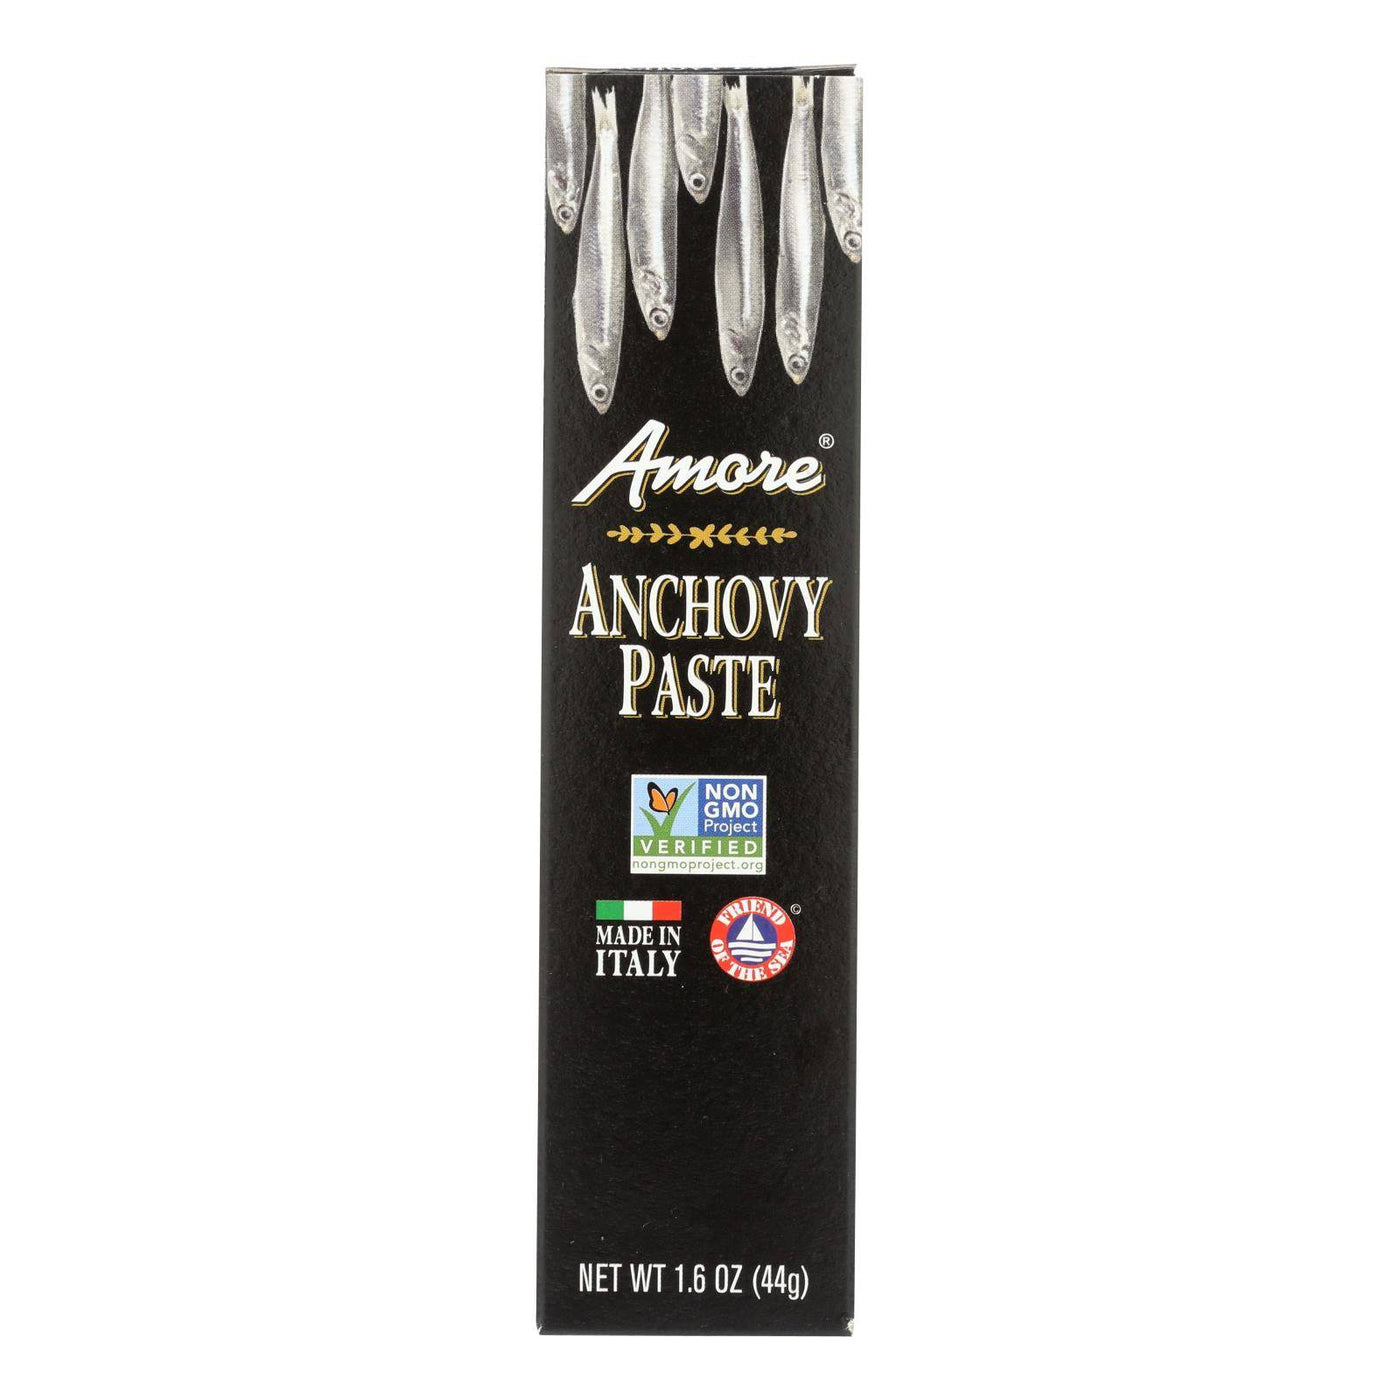 Amore - Italian Anchovy Paste - Case Of 12 - 1.6 Oz. | OnlyNaturals.us